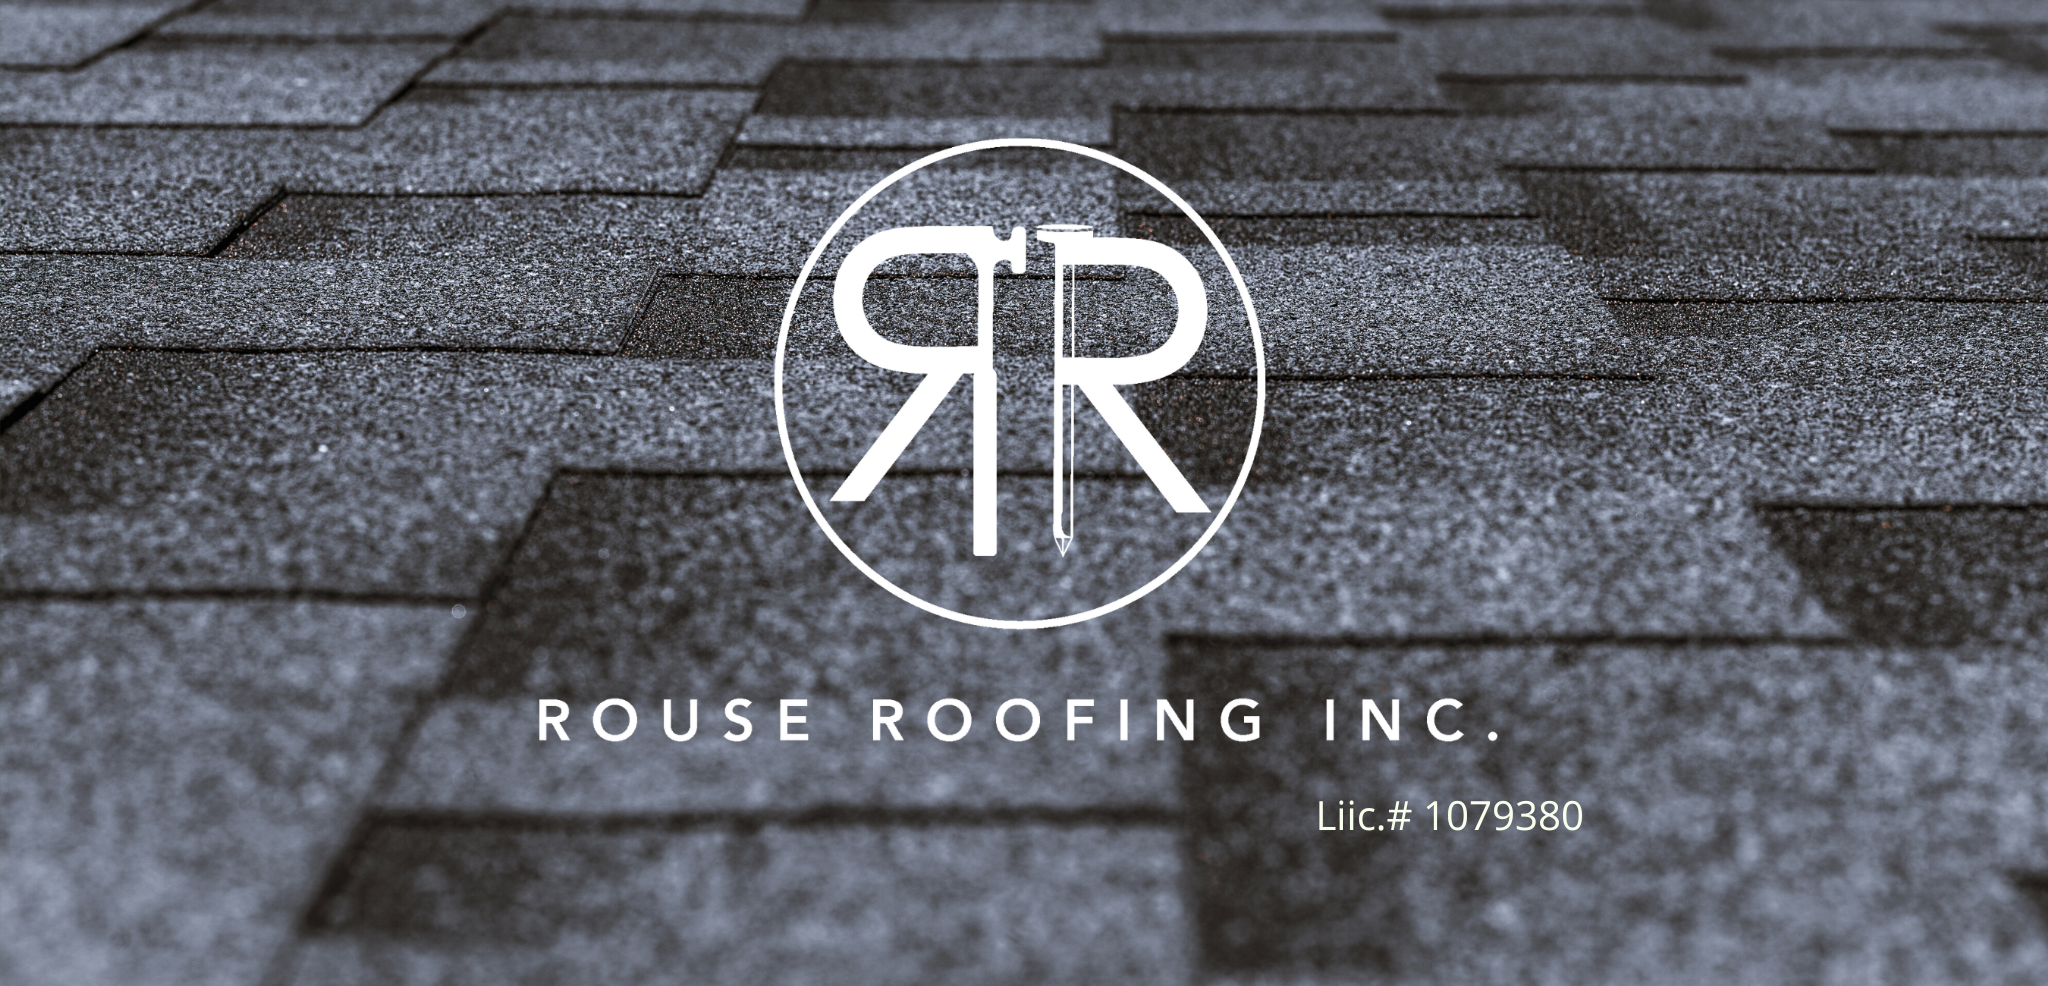 Rouse Roofing, Inc. Logo